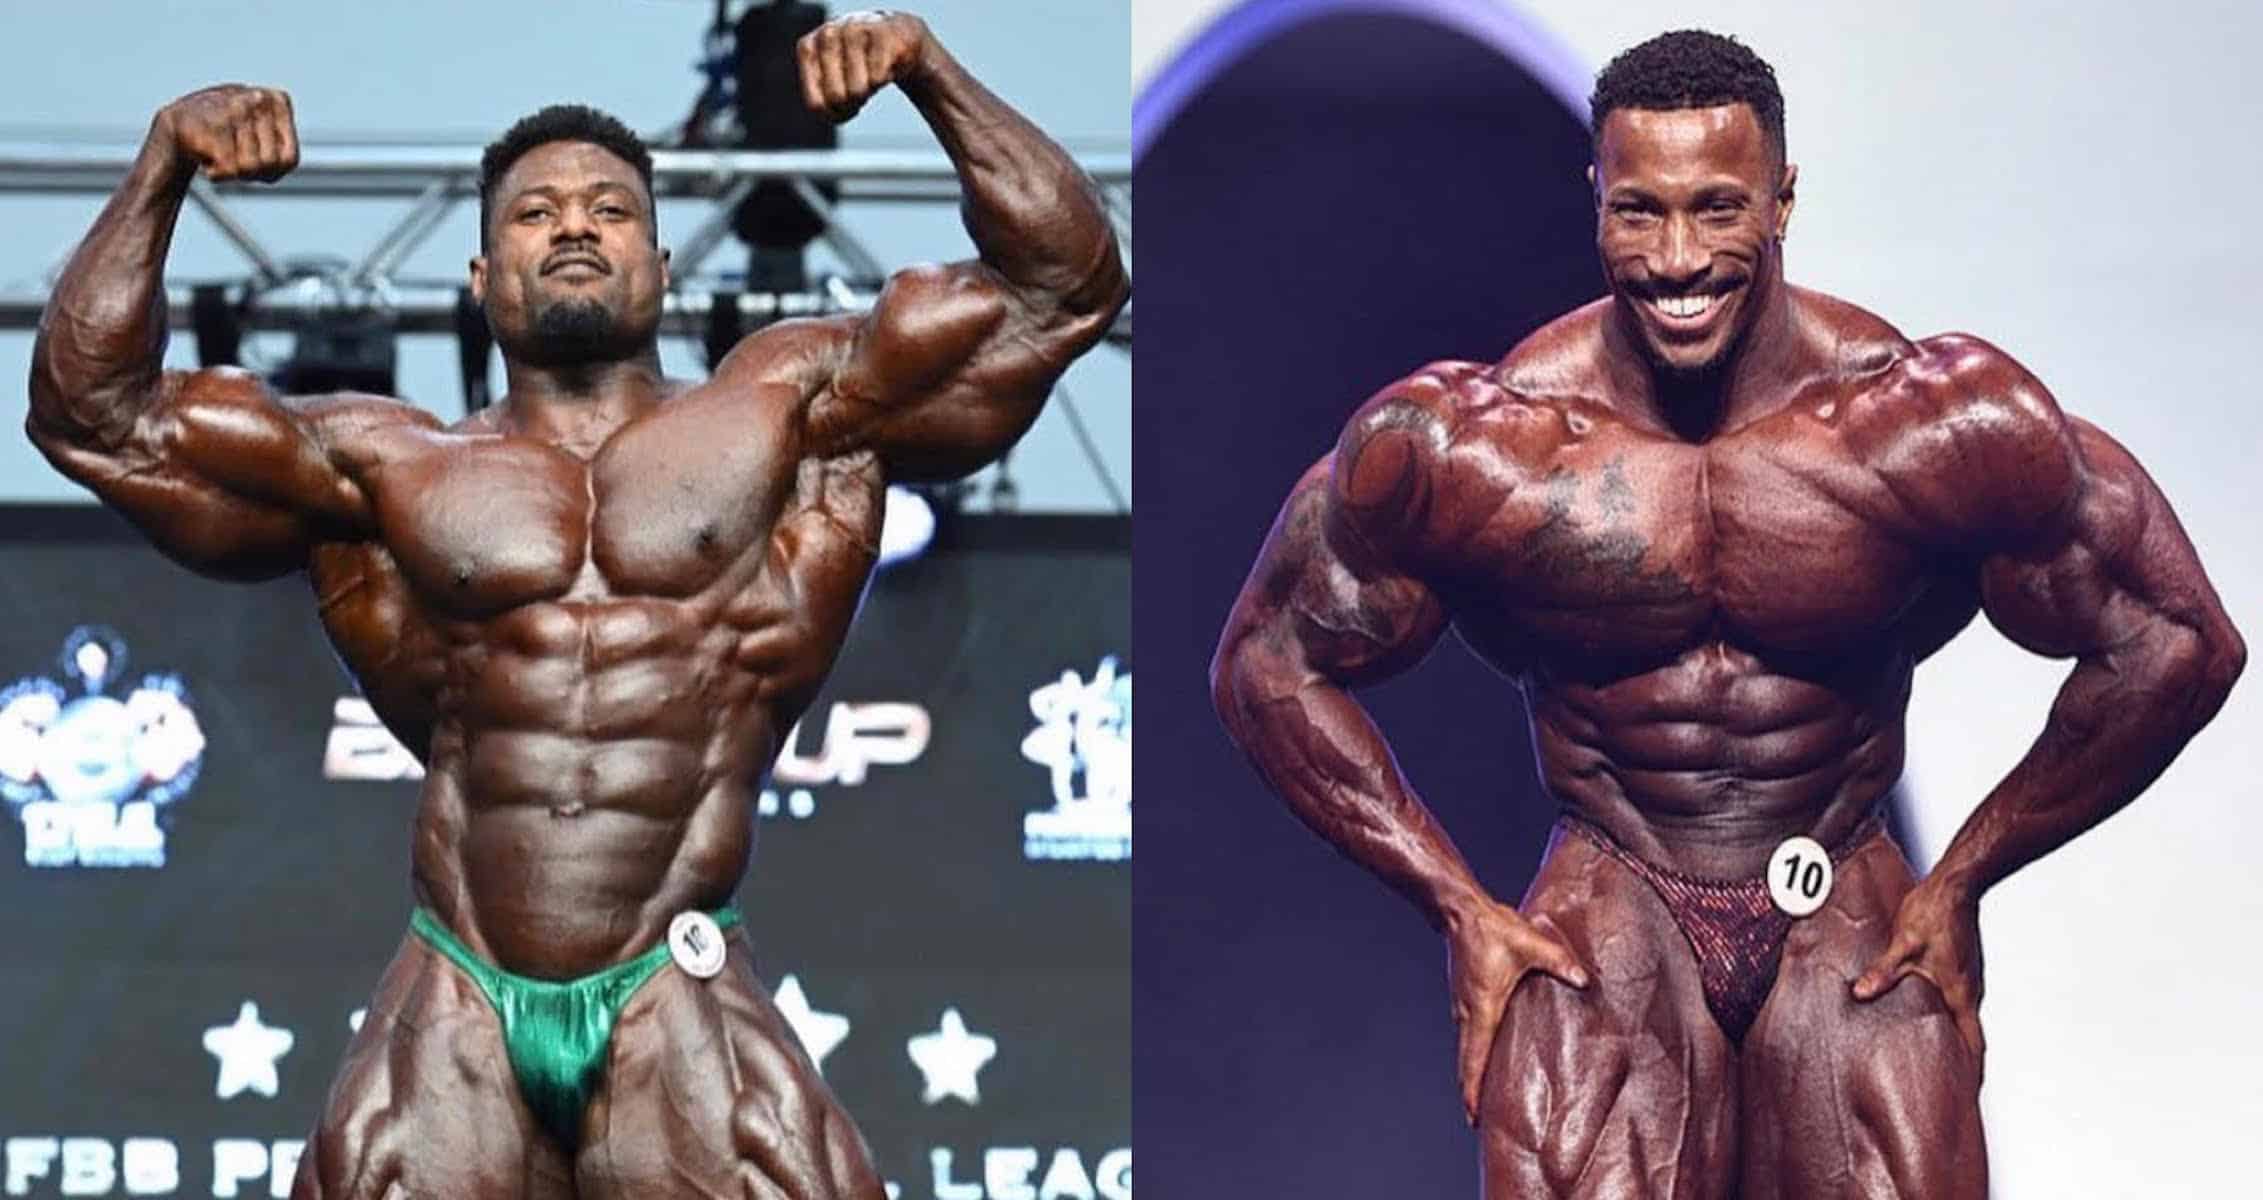 Andrew Jacked, Patrick Moore Join The 2023 Arnold Classic Lineup